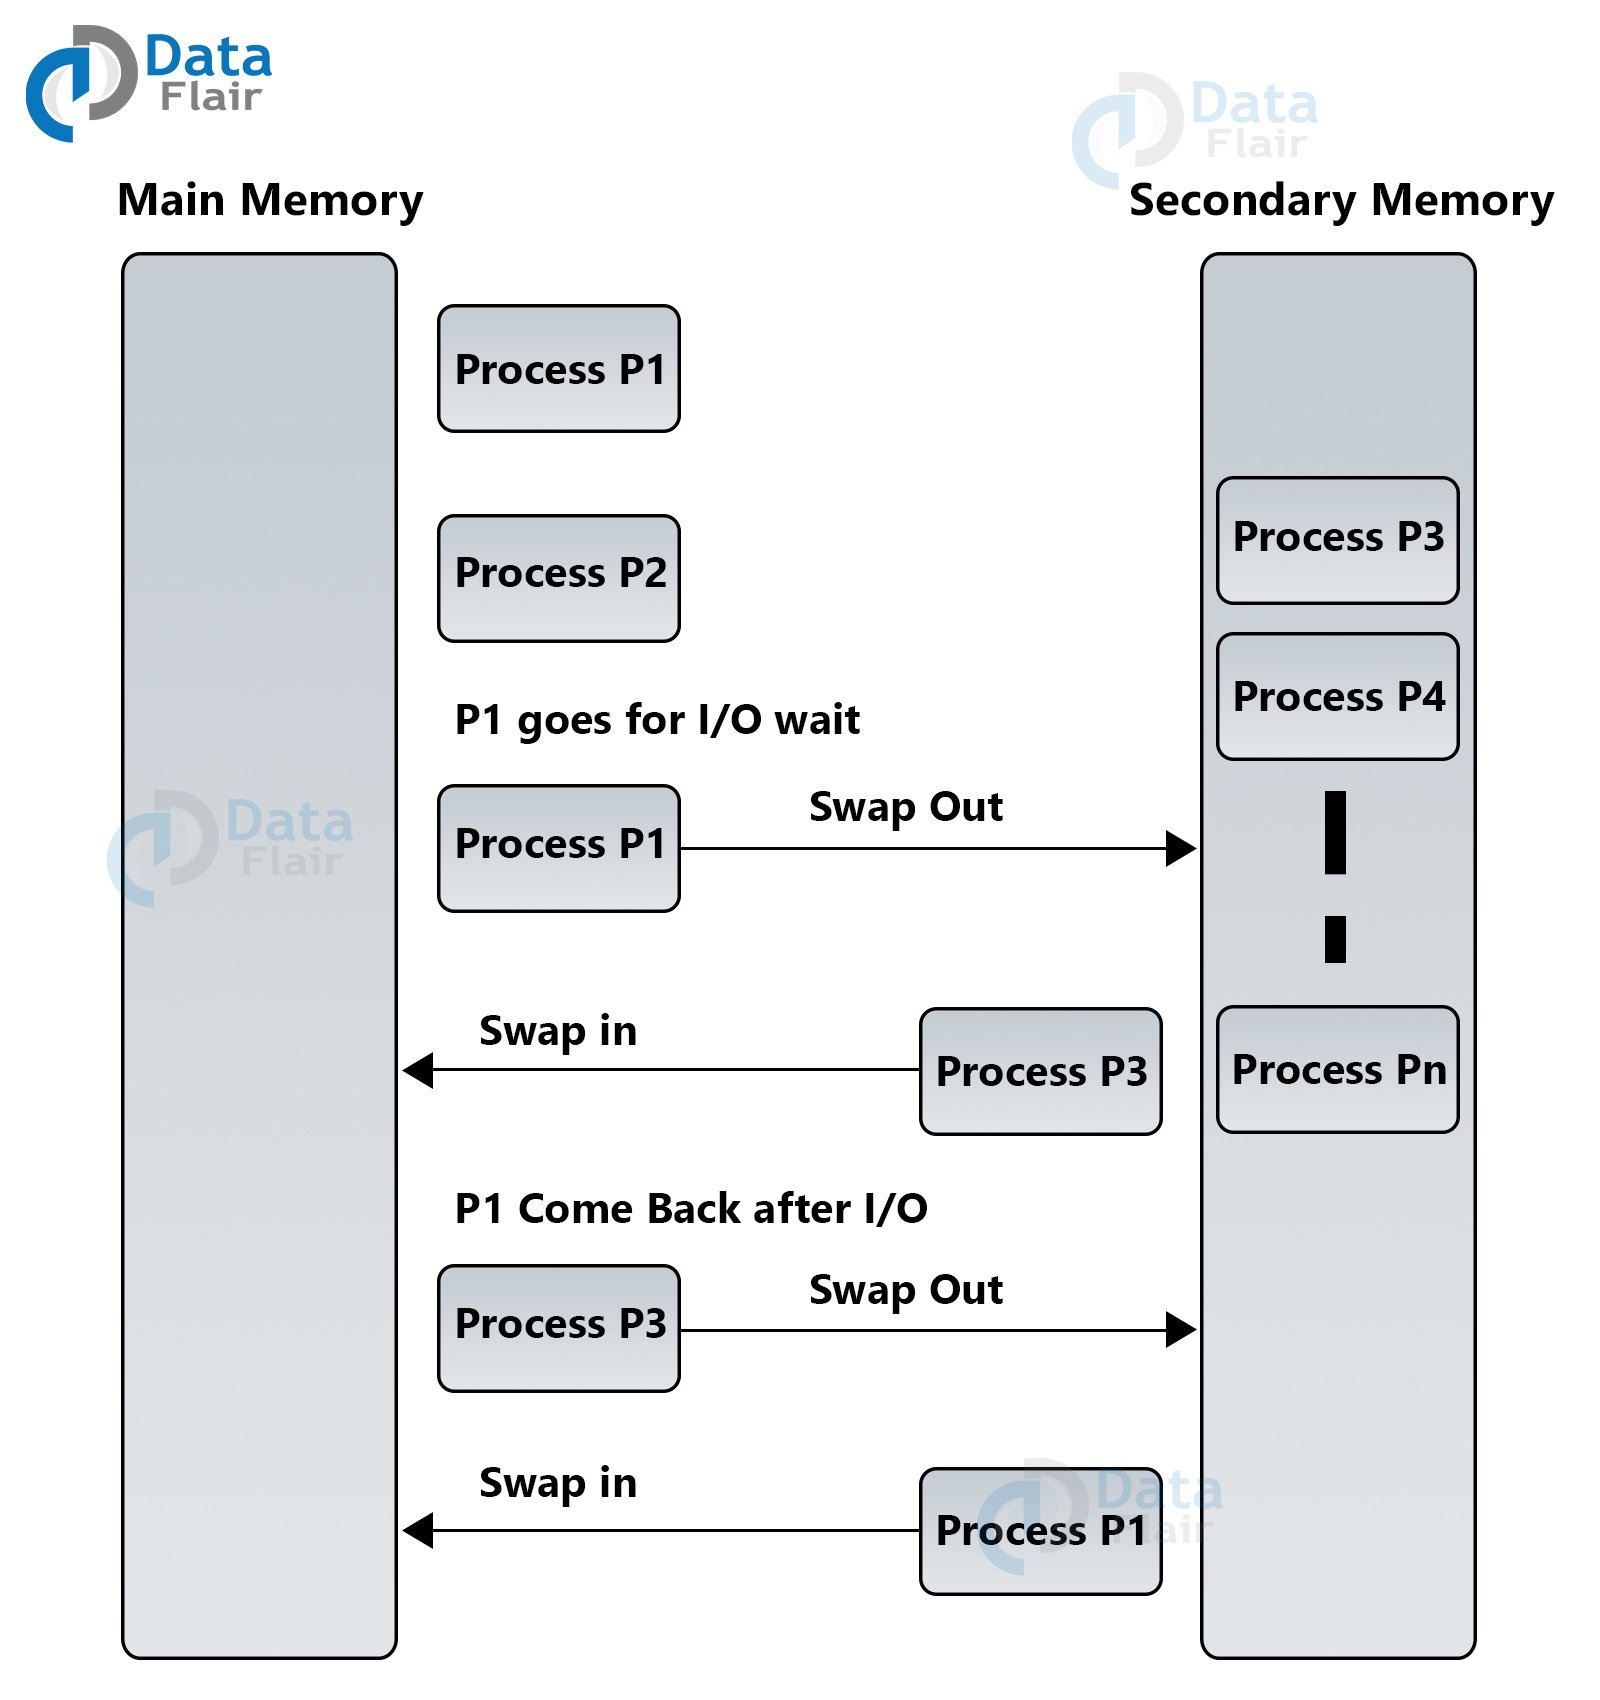 case study on memory management